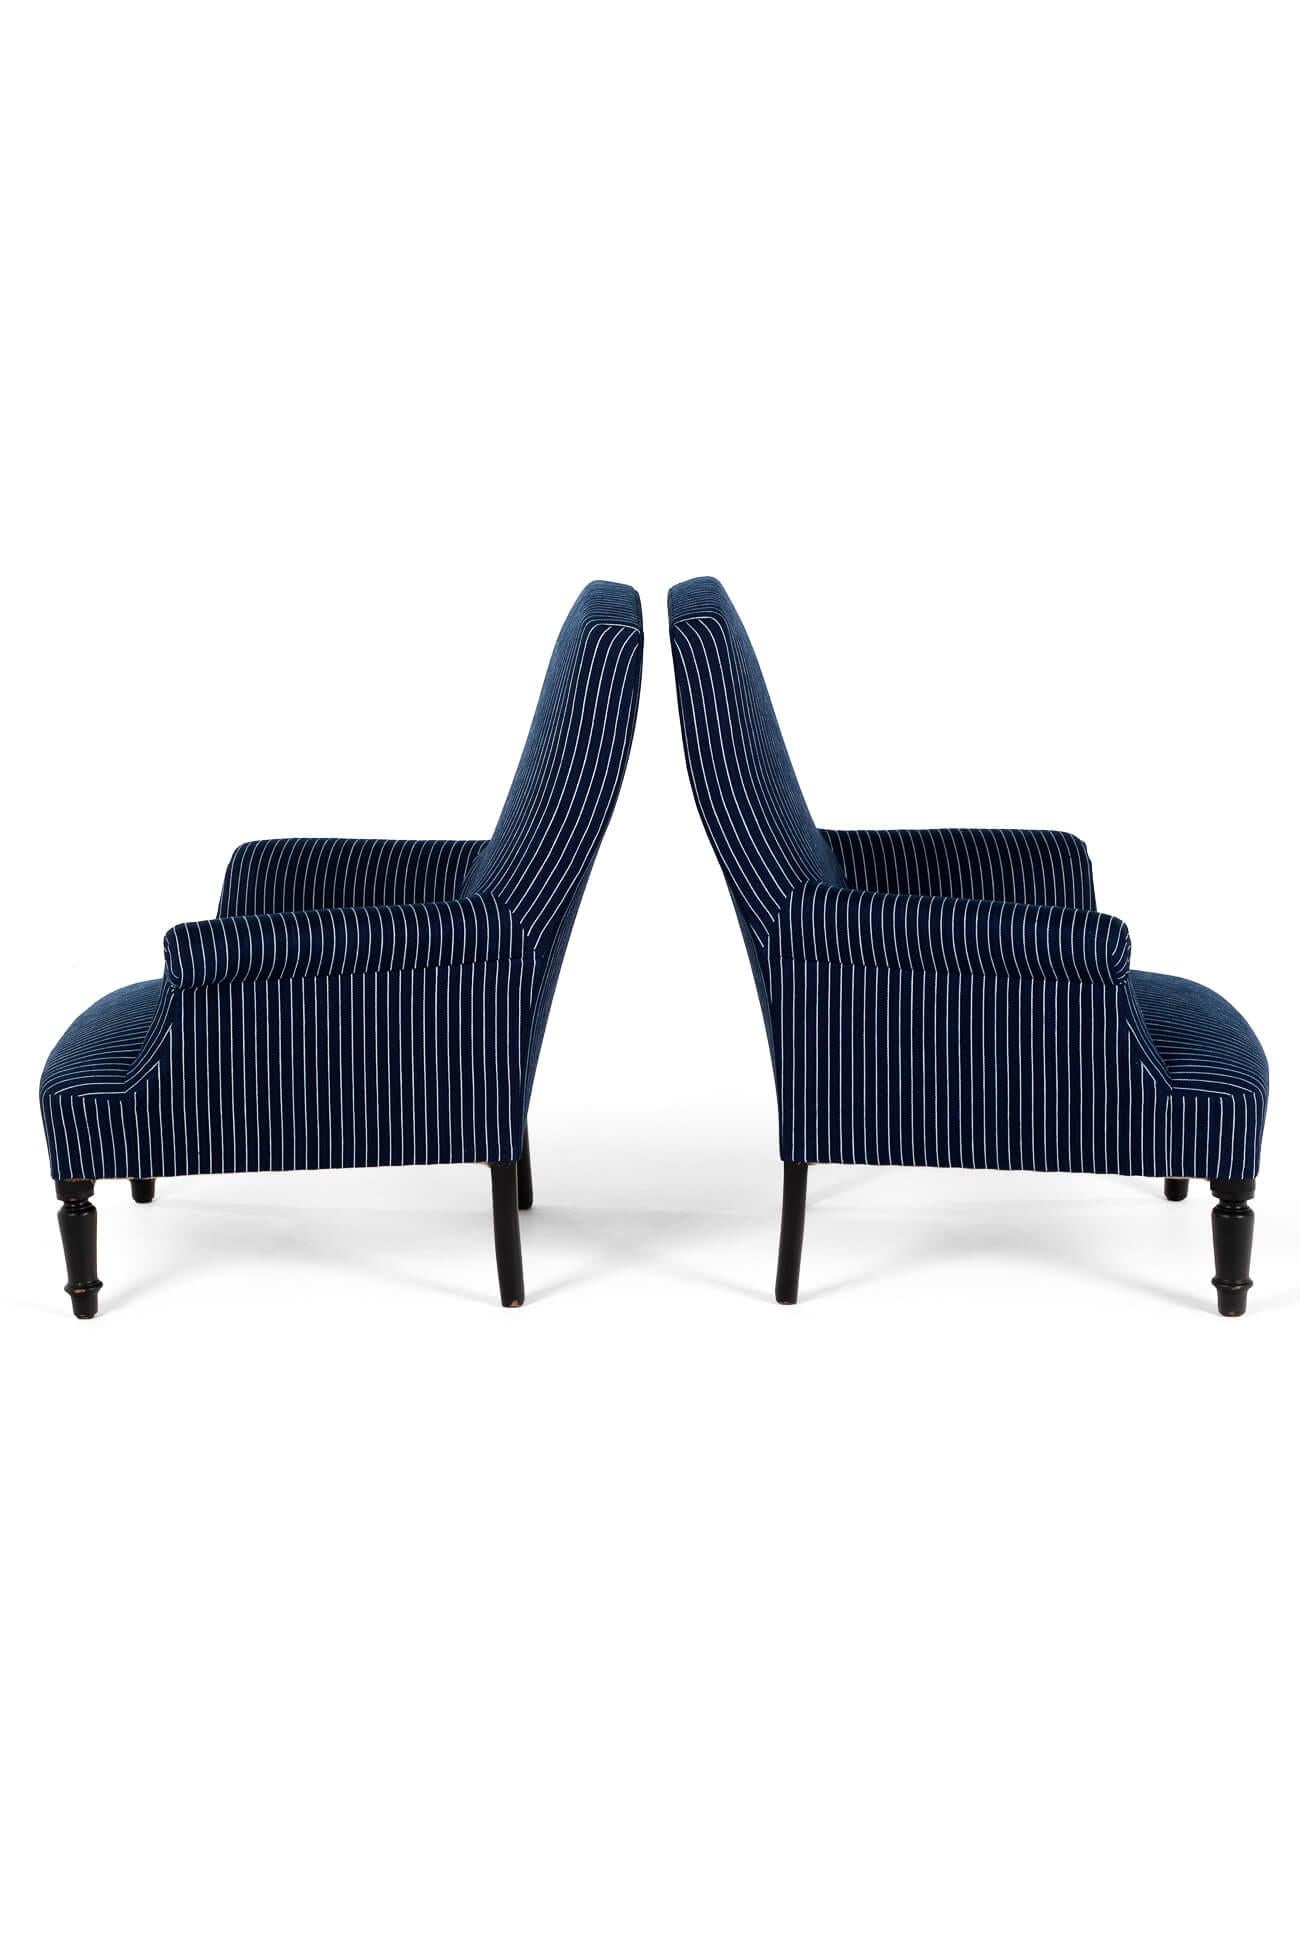 French Provincial Pair of Napoleon armchairs in Woven Navy Stripe For Sale